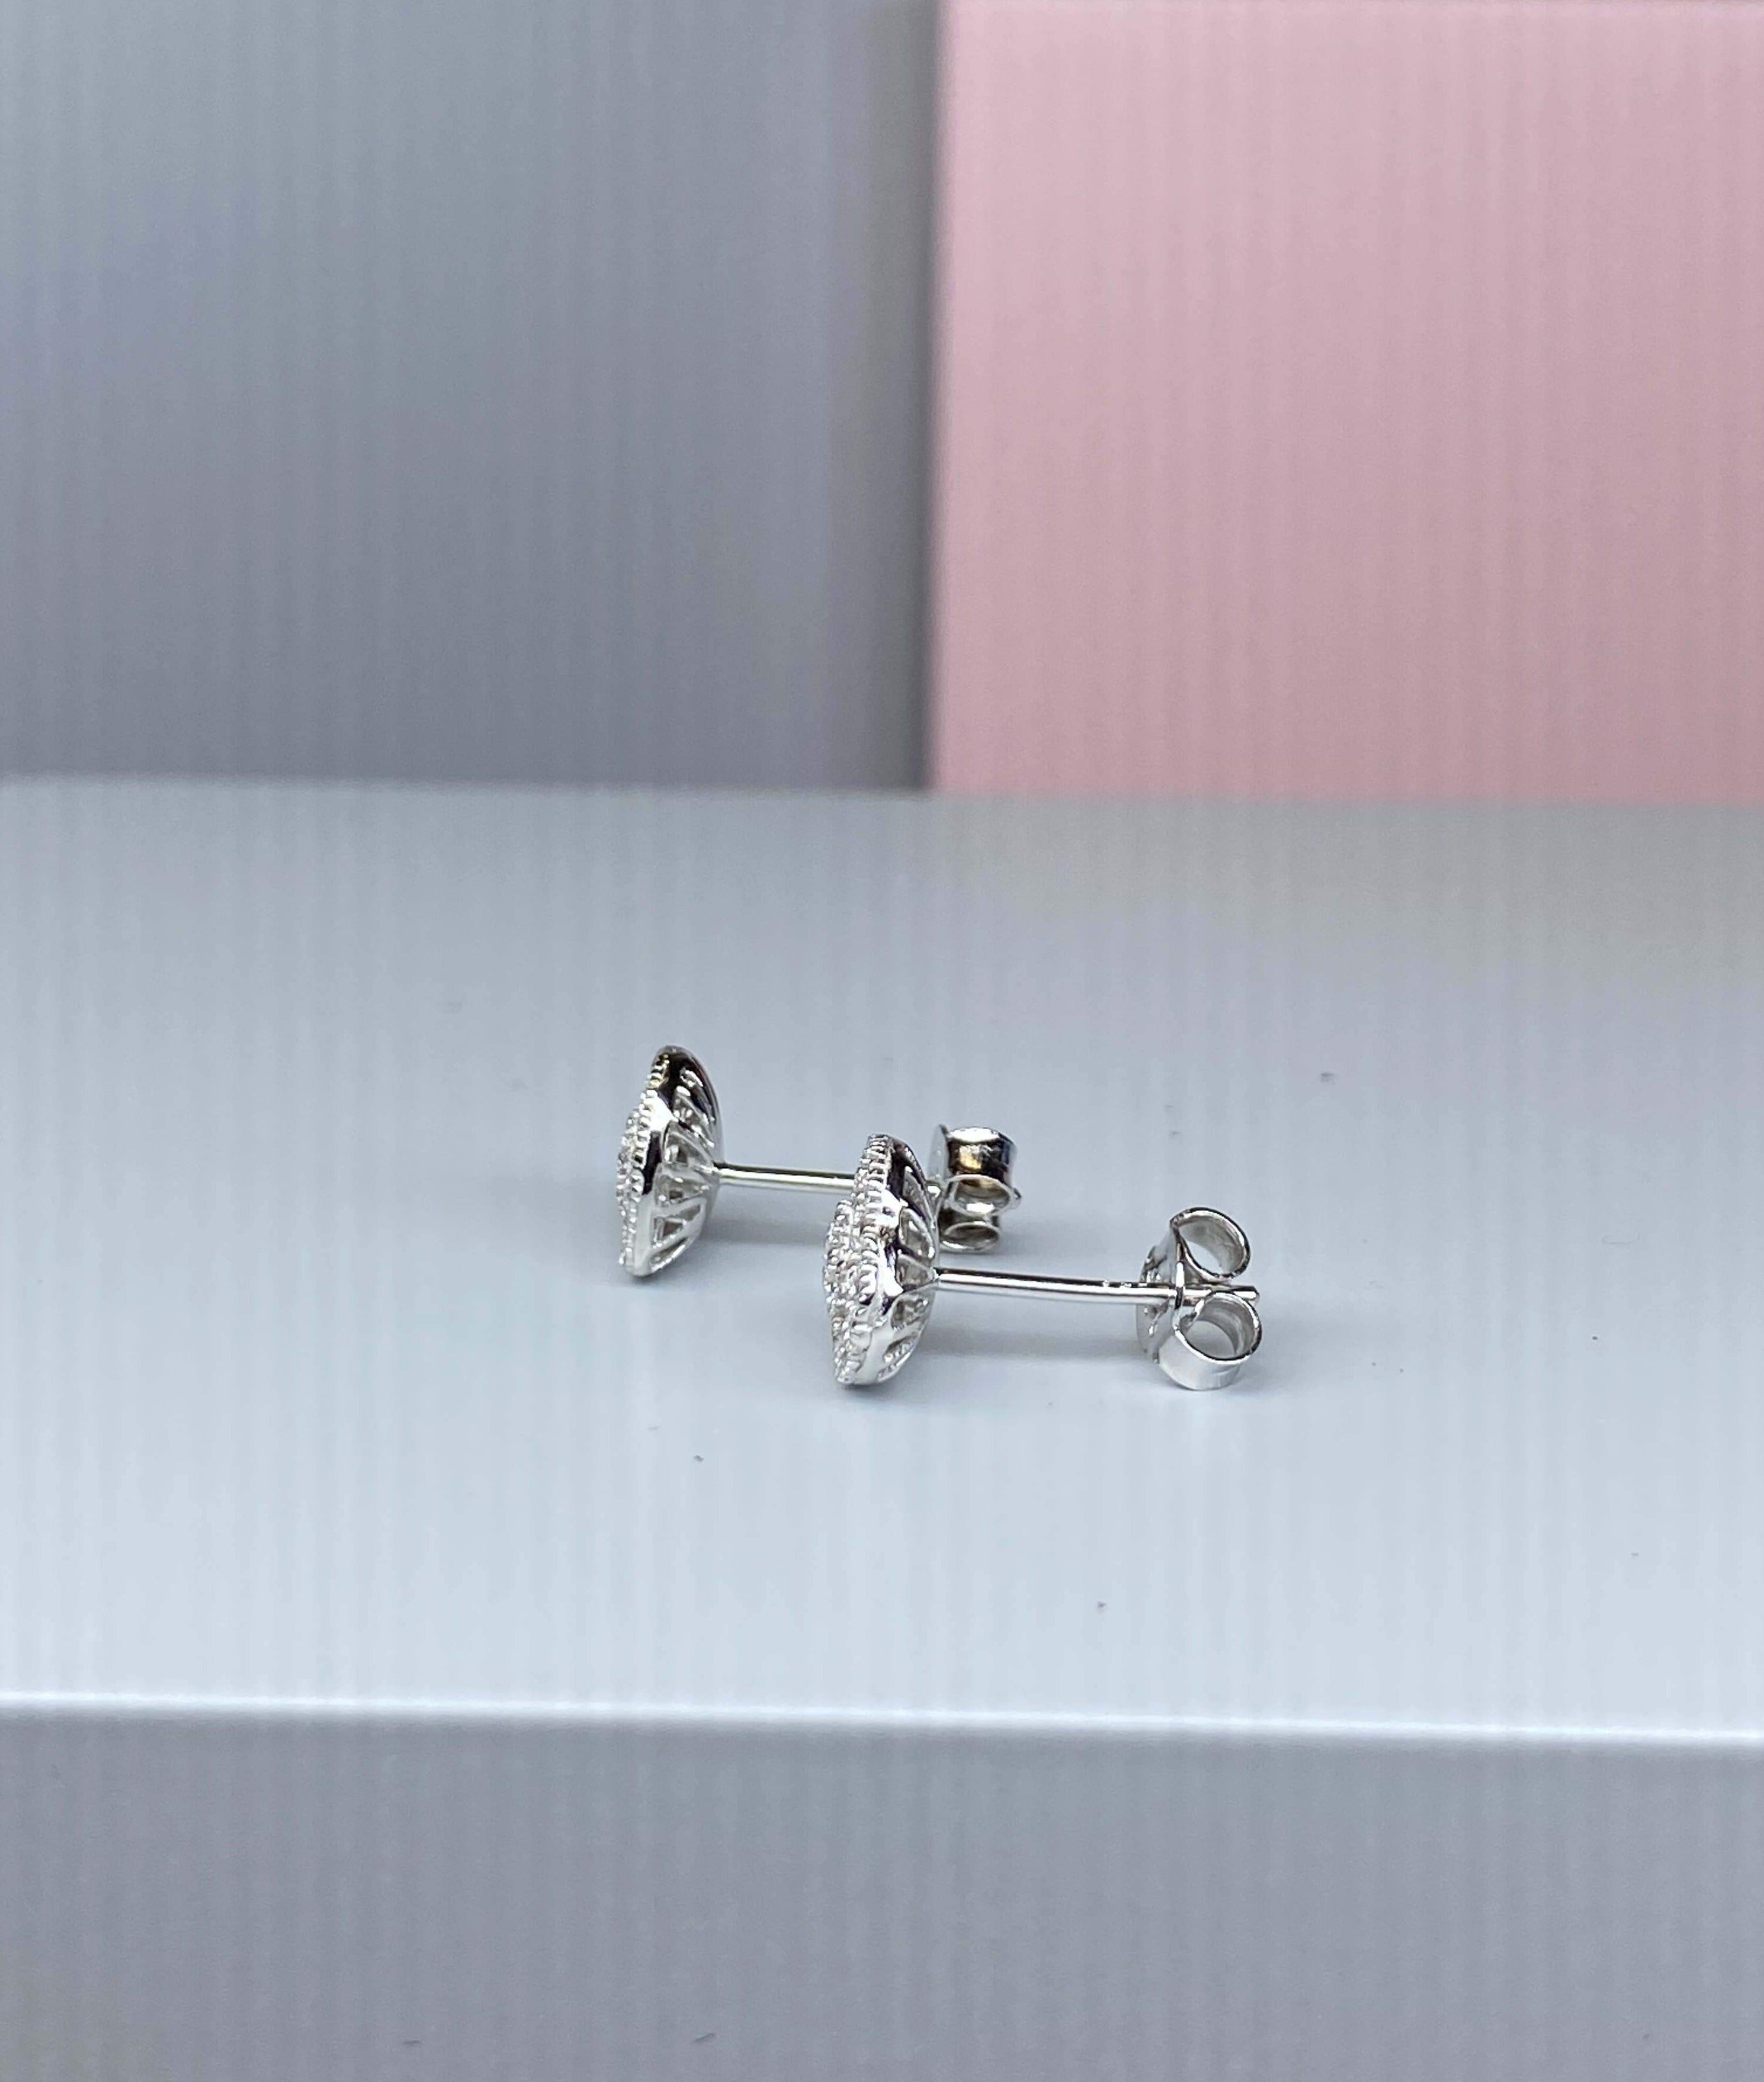 Sterling Silver Heart CZ Earrings - Hallmark Jewellers Formby & The Jewellers Bench Widnes